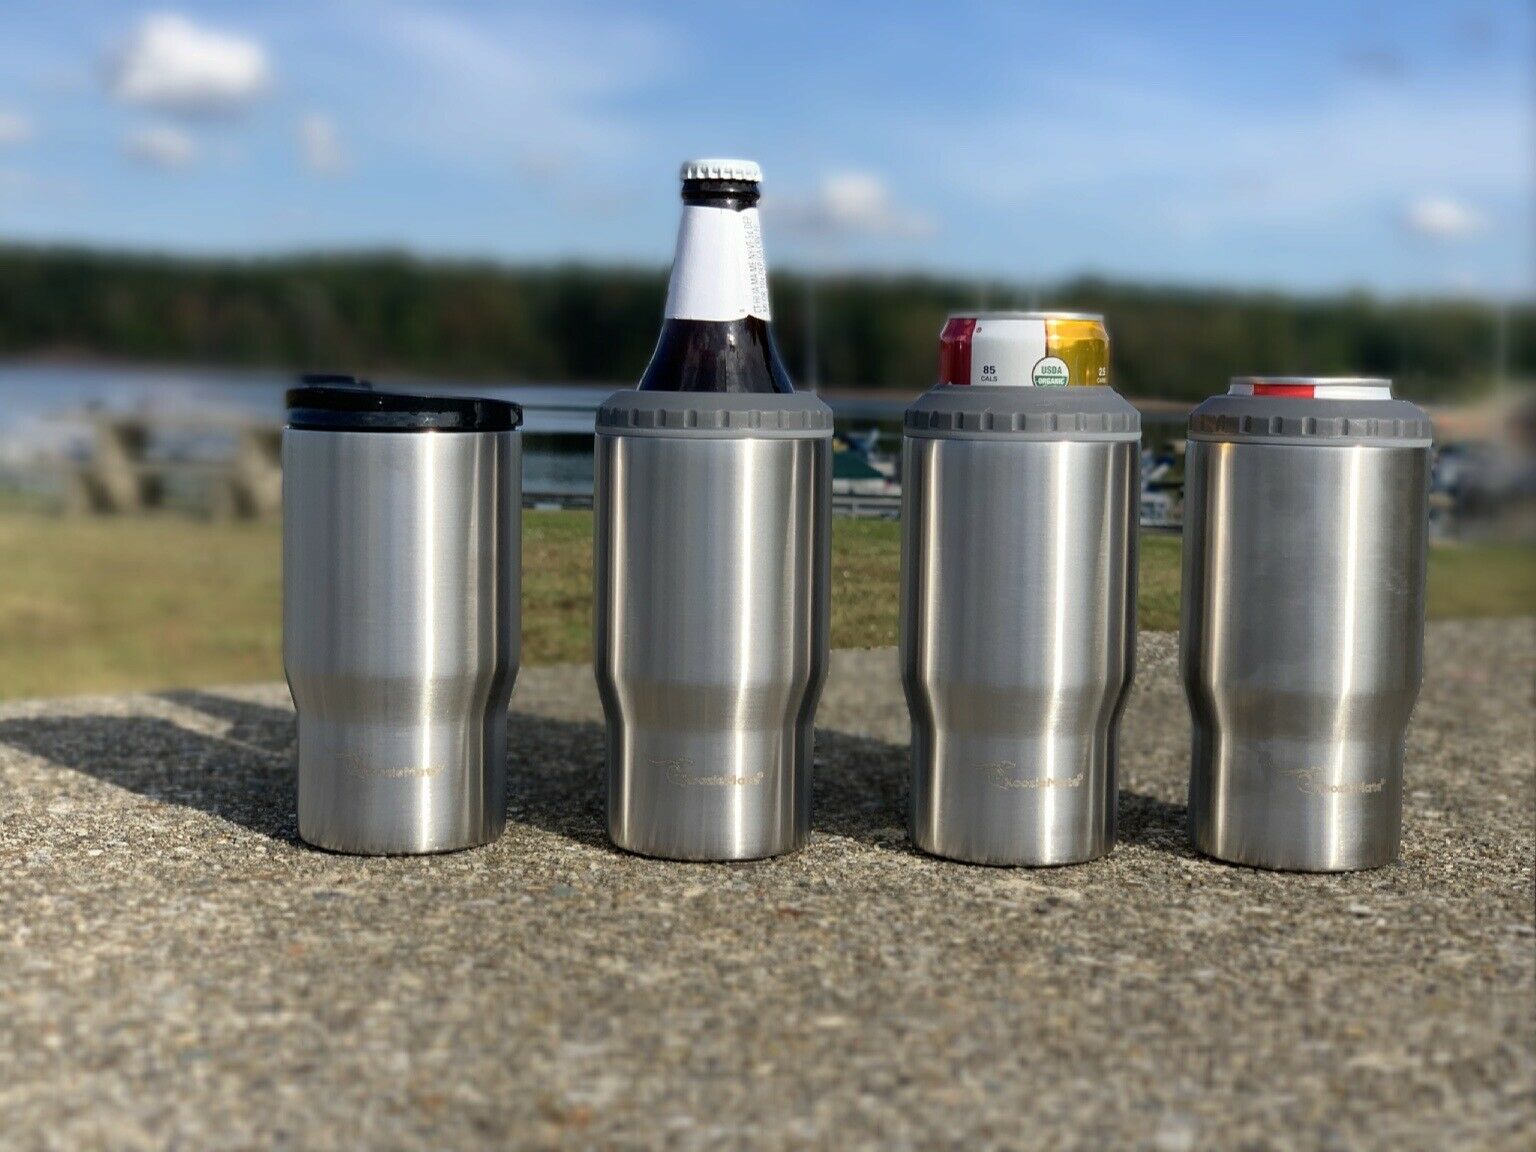 4 In 1 Km Stainless Beer Can/bottle Cooler, Coffee Tumbler Drink Glass